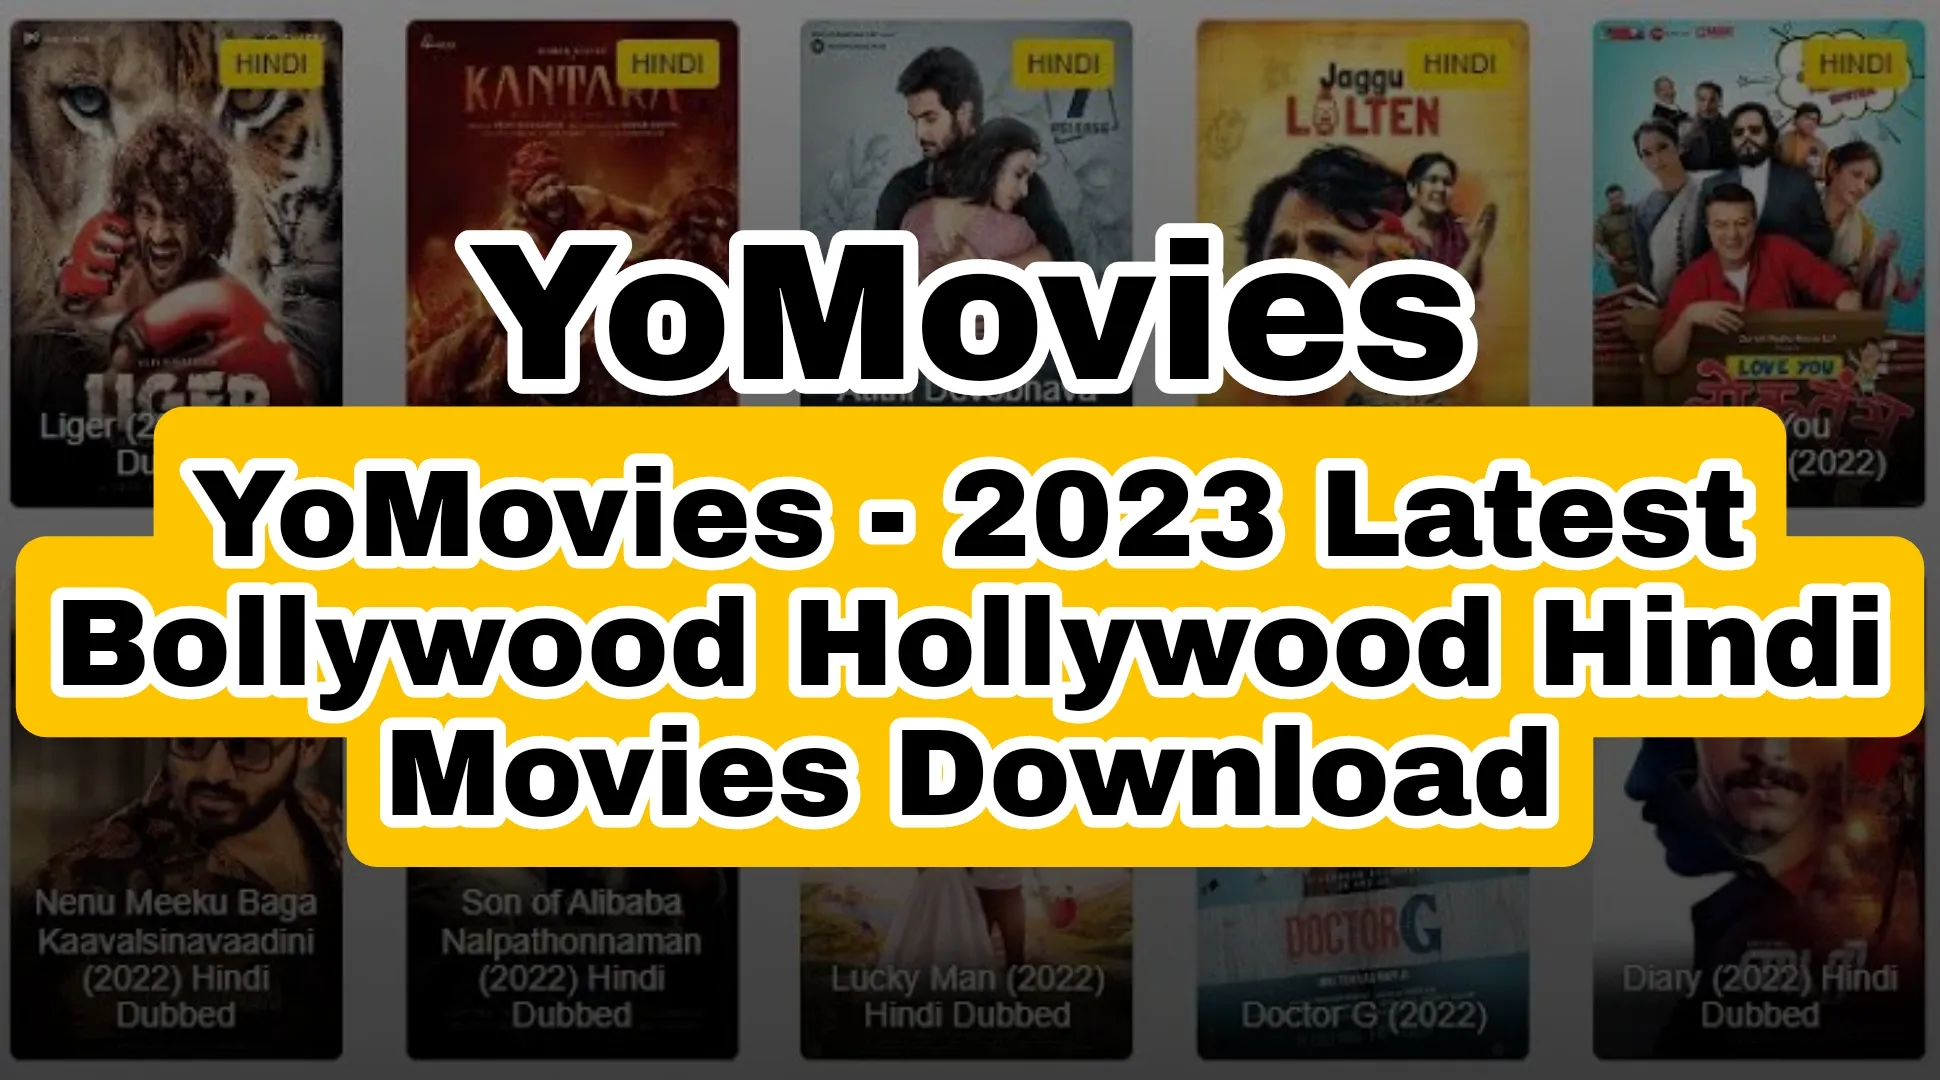 Yomovies 2023 Latest Bollywood & Hollywood Movies Download HD 1080p 720p 480p Free